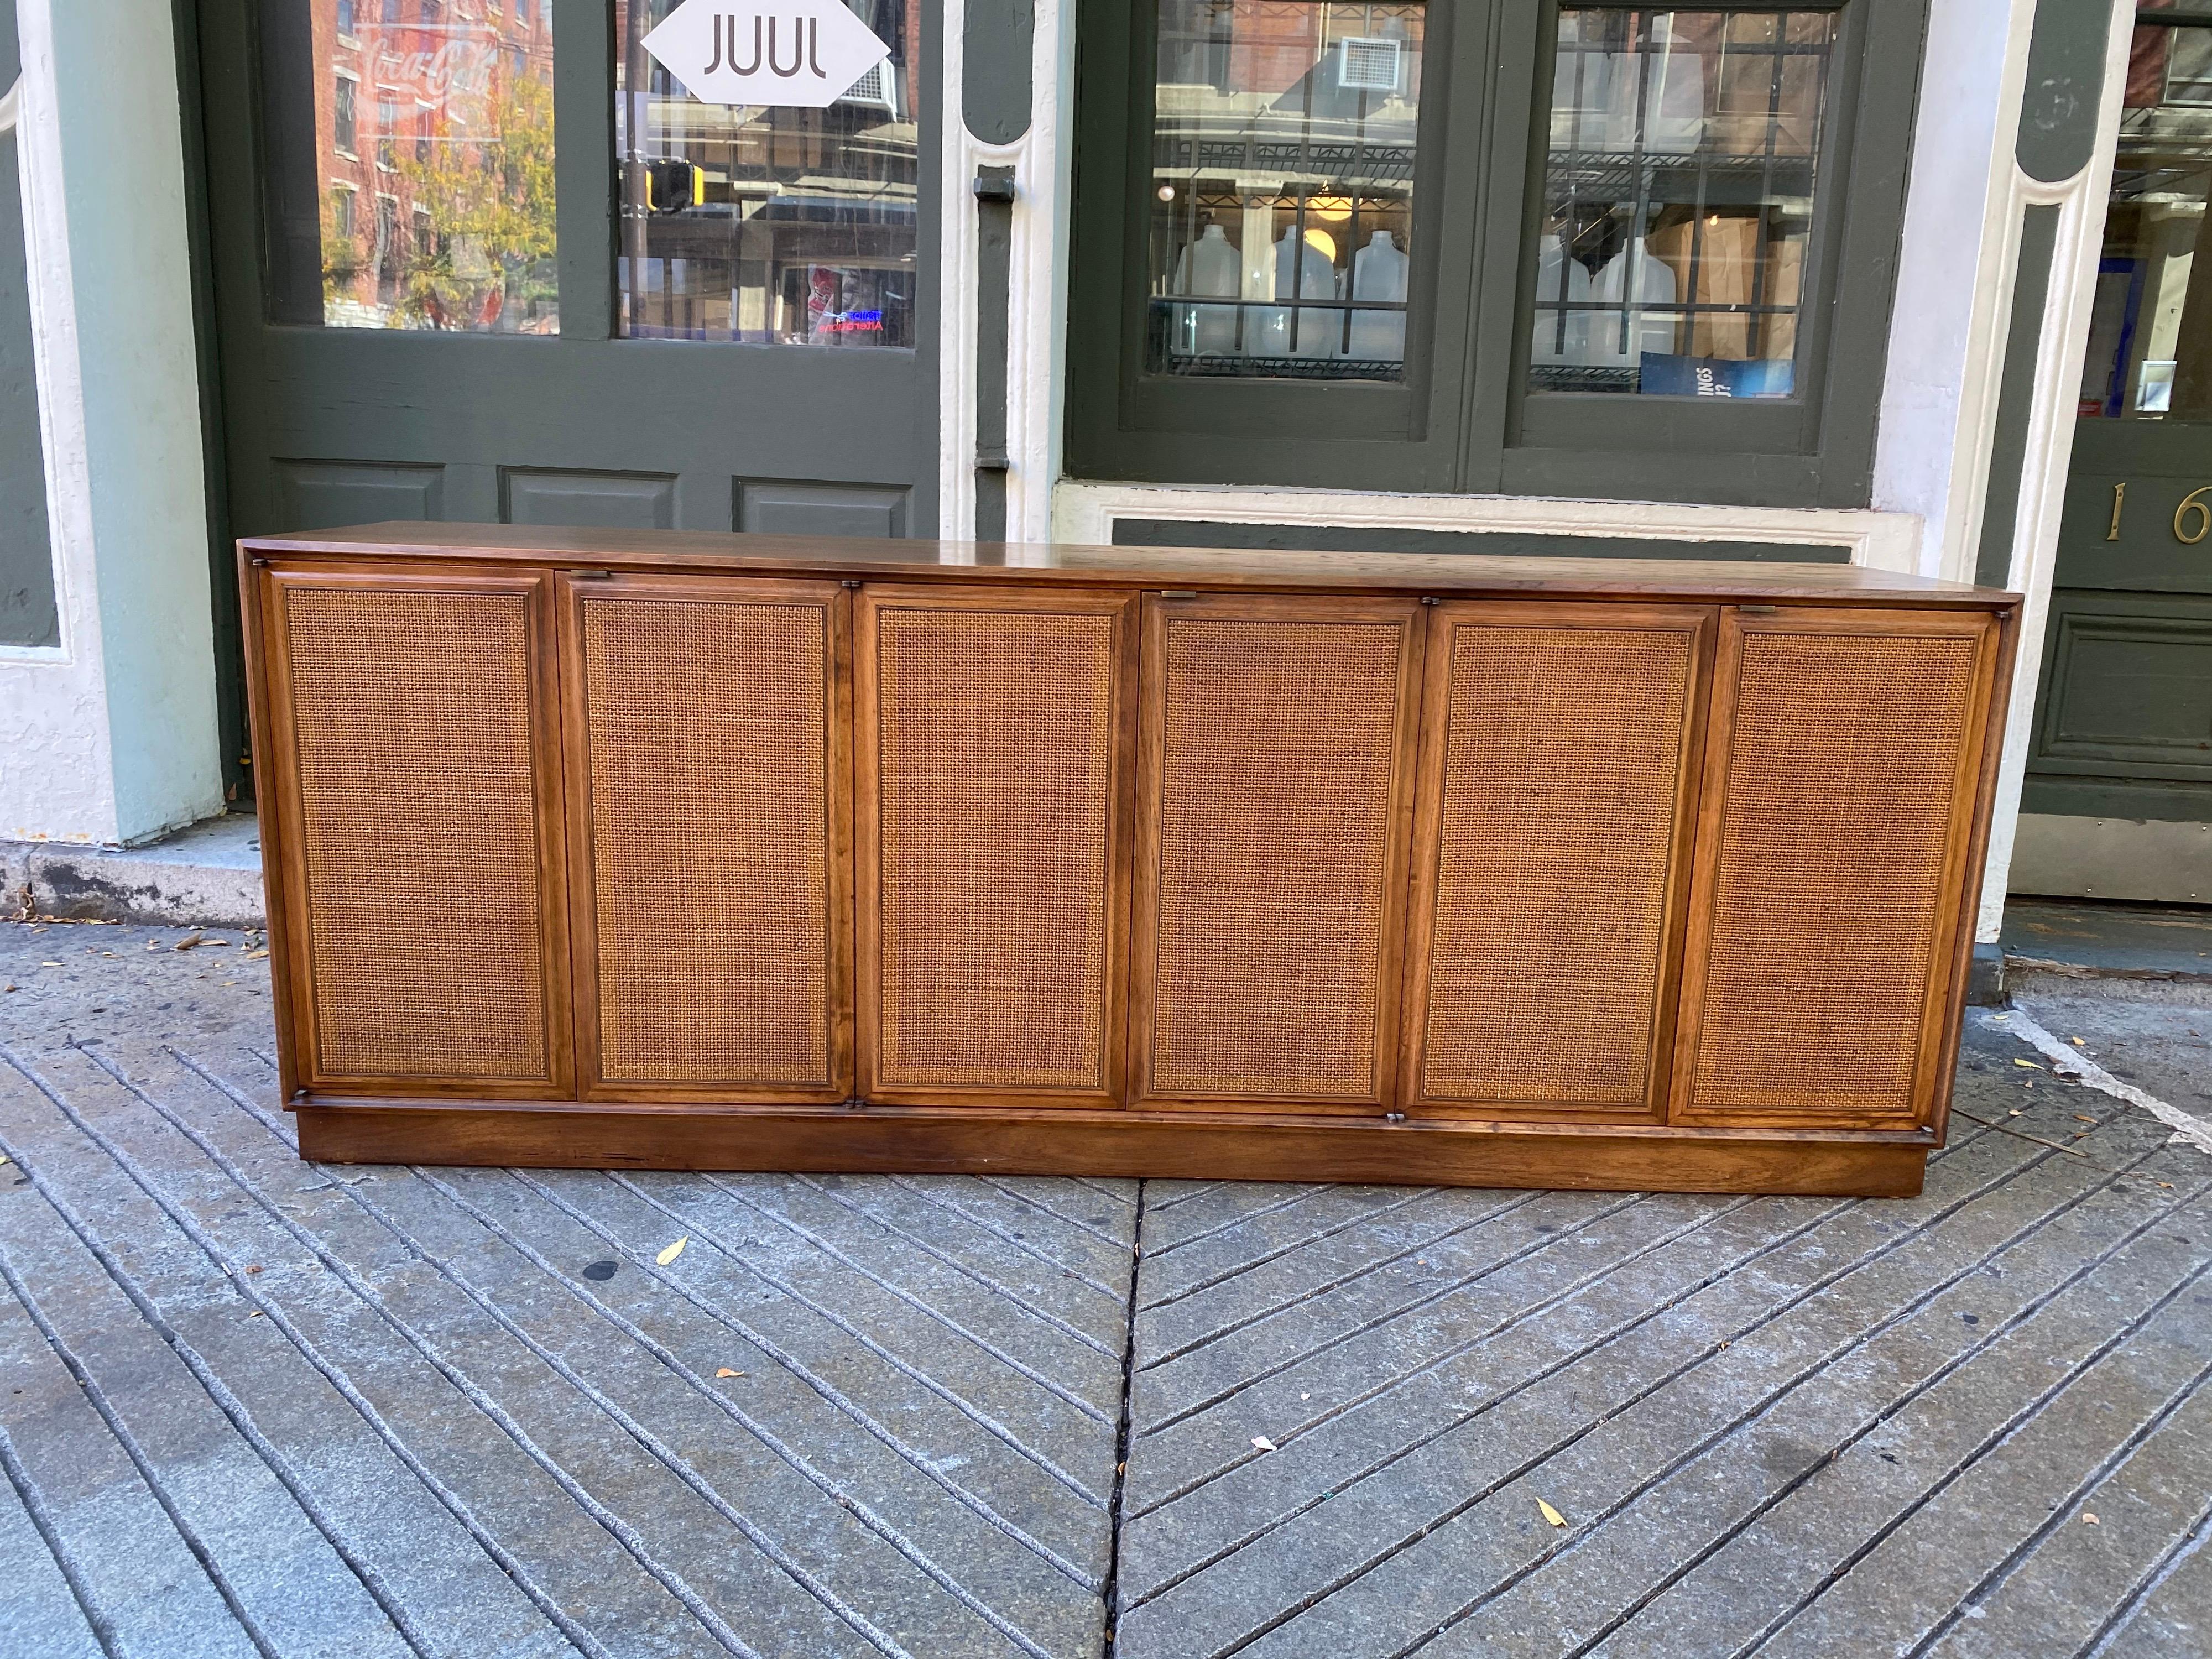 Founders 6-door caned front credenza/ buffet. Walnut finish, with 3 sets of double doors. Each door opens to reveal an adjustable shelf and 1 pull out. Very nice clean condition! Nice simple lines that go with any interior!